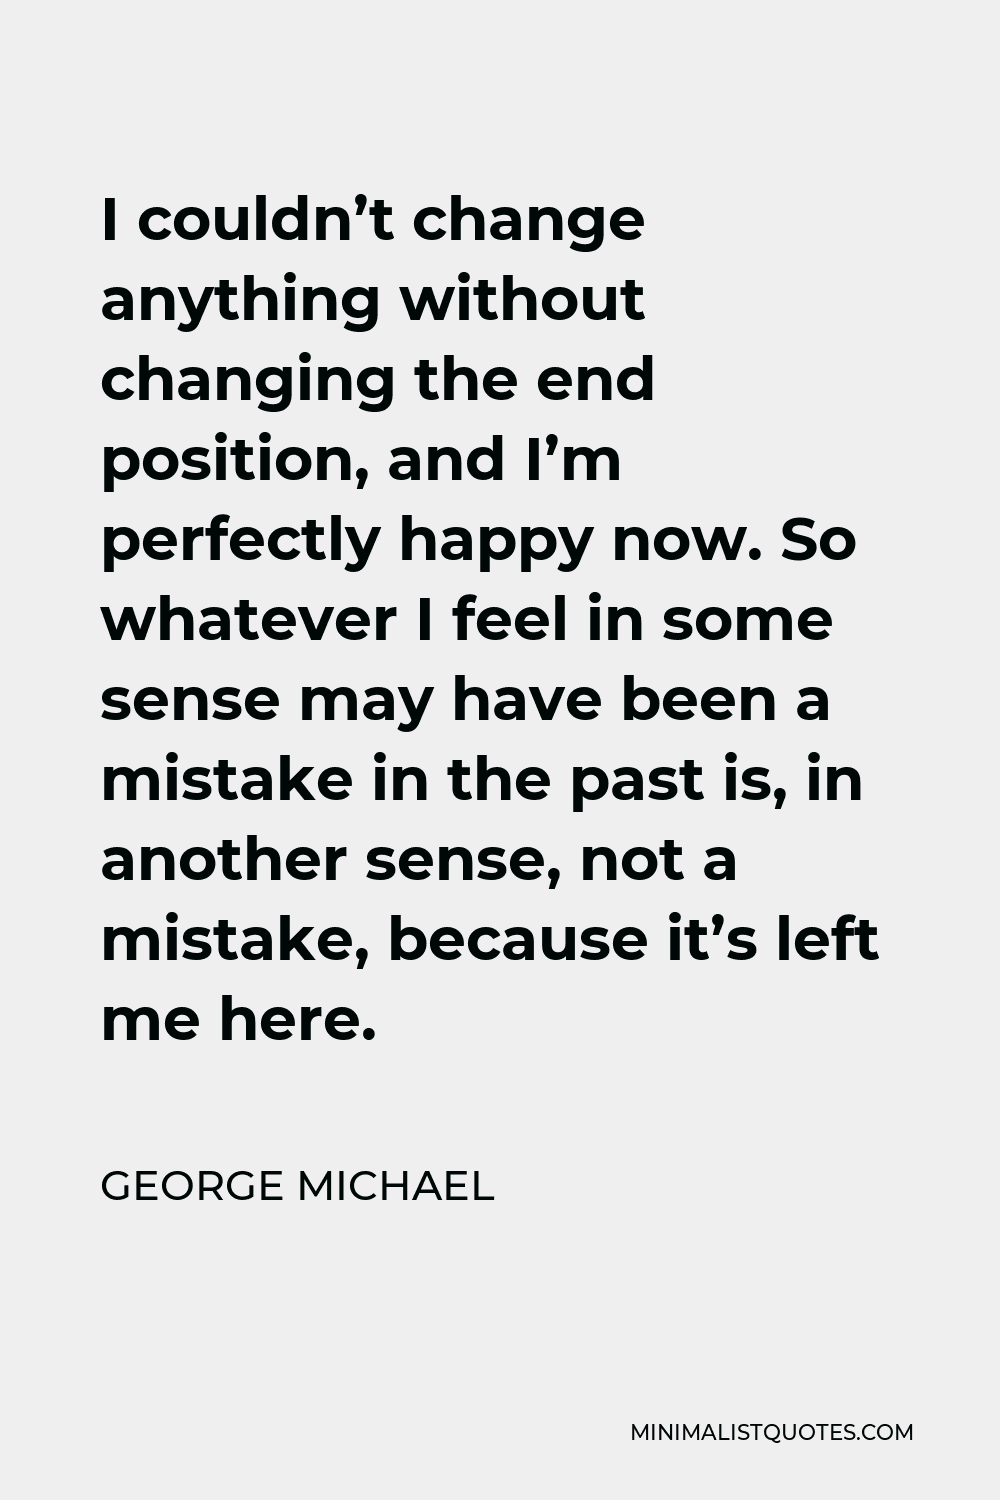 George Michael Quote - I couldn’t change anything without changing the end position, and I’m perfectly happy now. So whatever I feel in some sense may have been a mistake in the past is, in another sense, not a mistake, because it’s left me here.